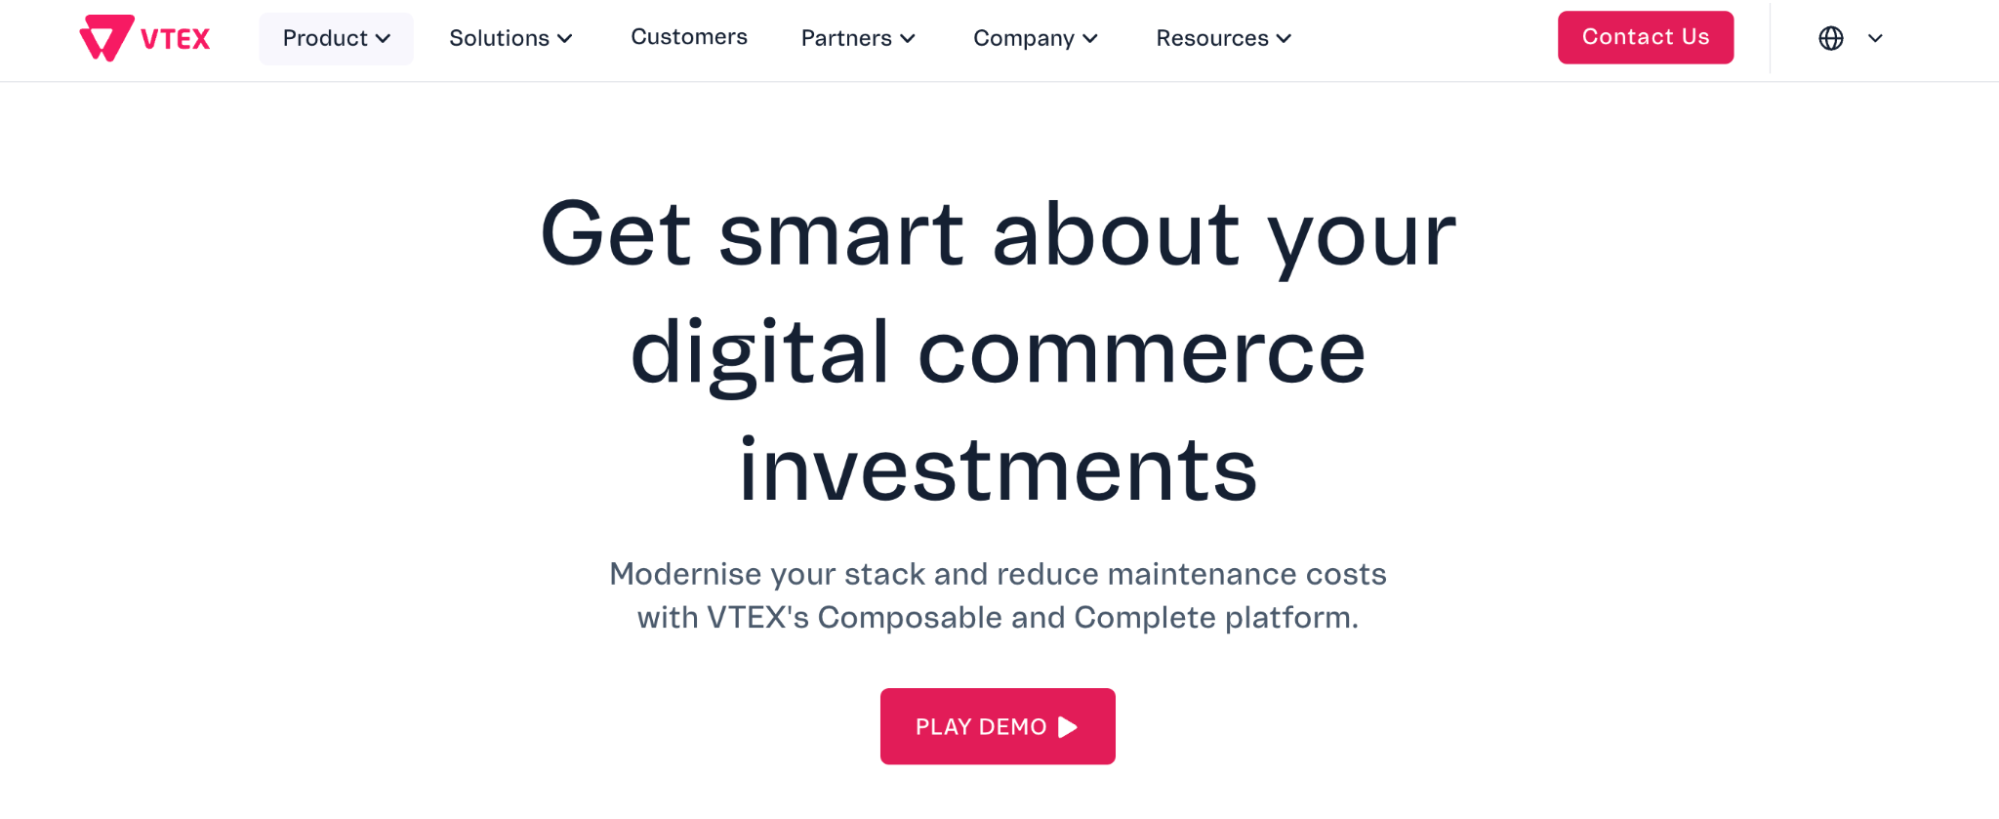 VTEX screengrab with the headline, “Get smart about your digital commerce investments.”